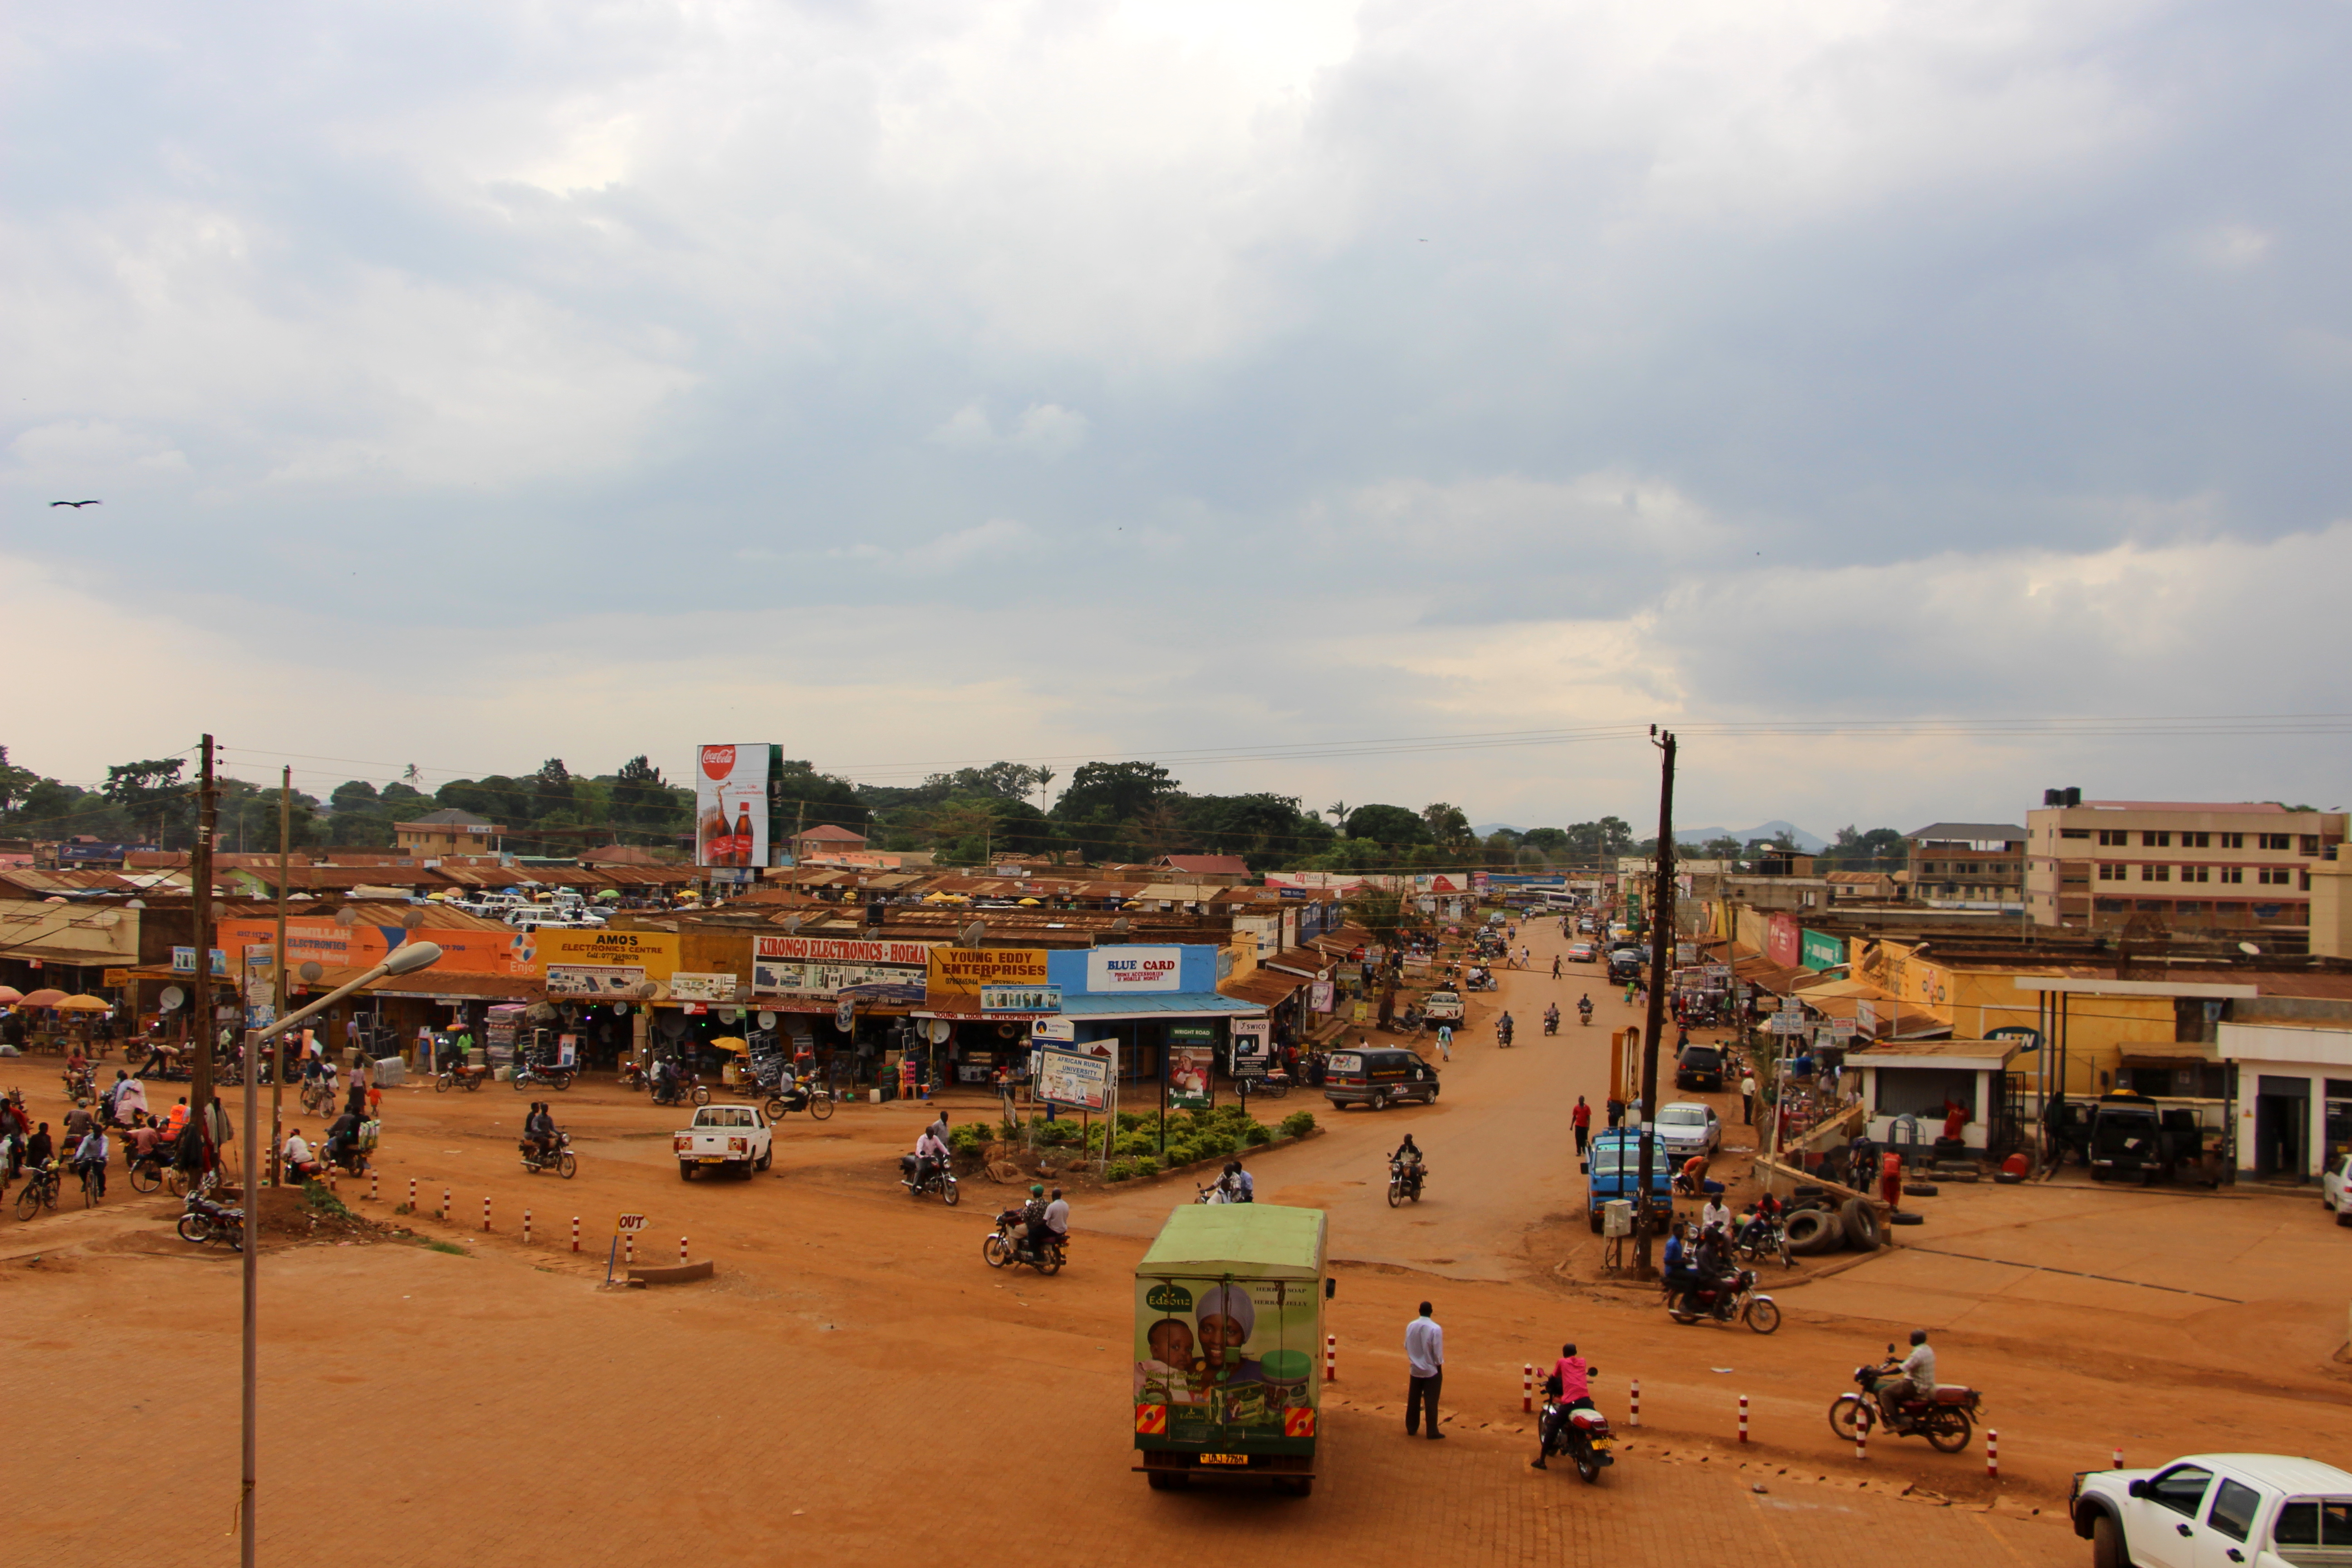 The bustling streets of Hoima Town.